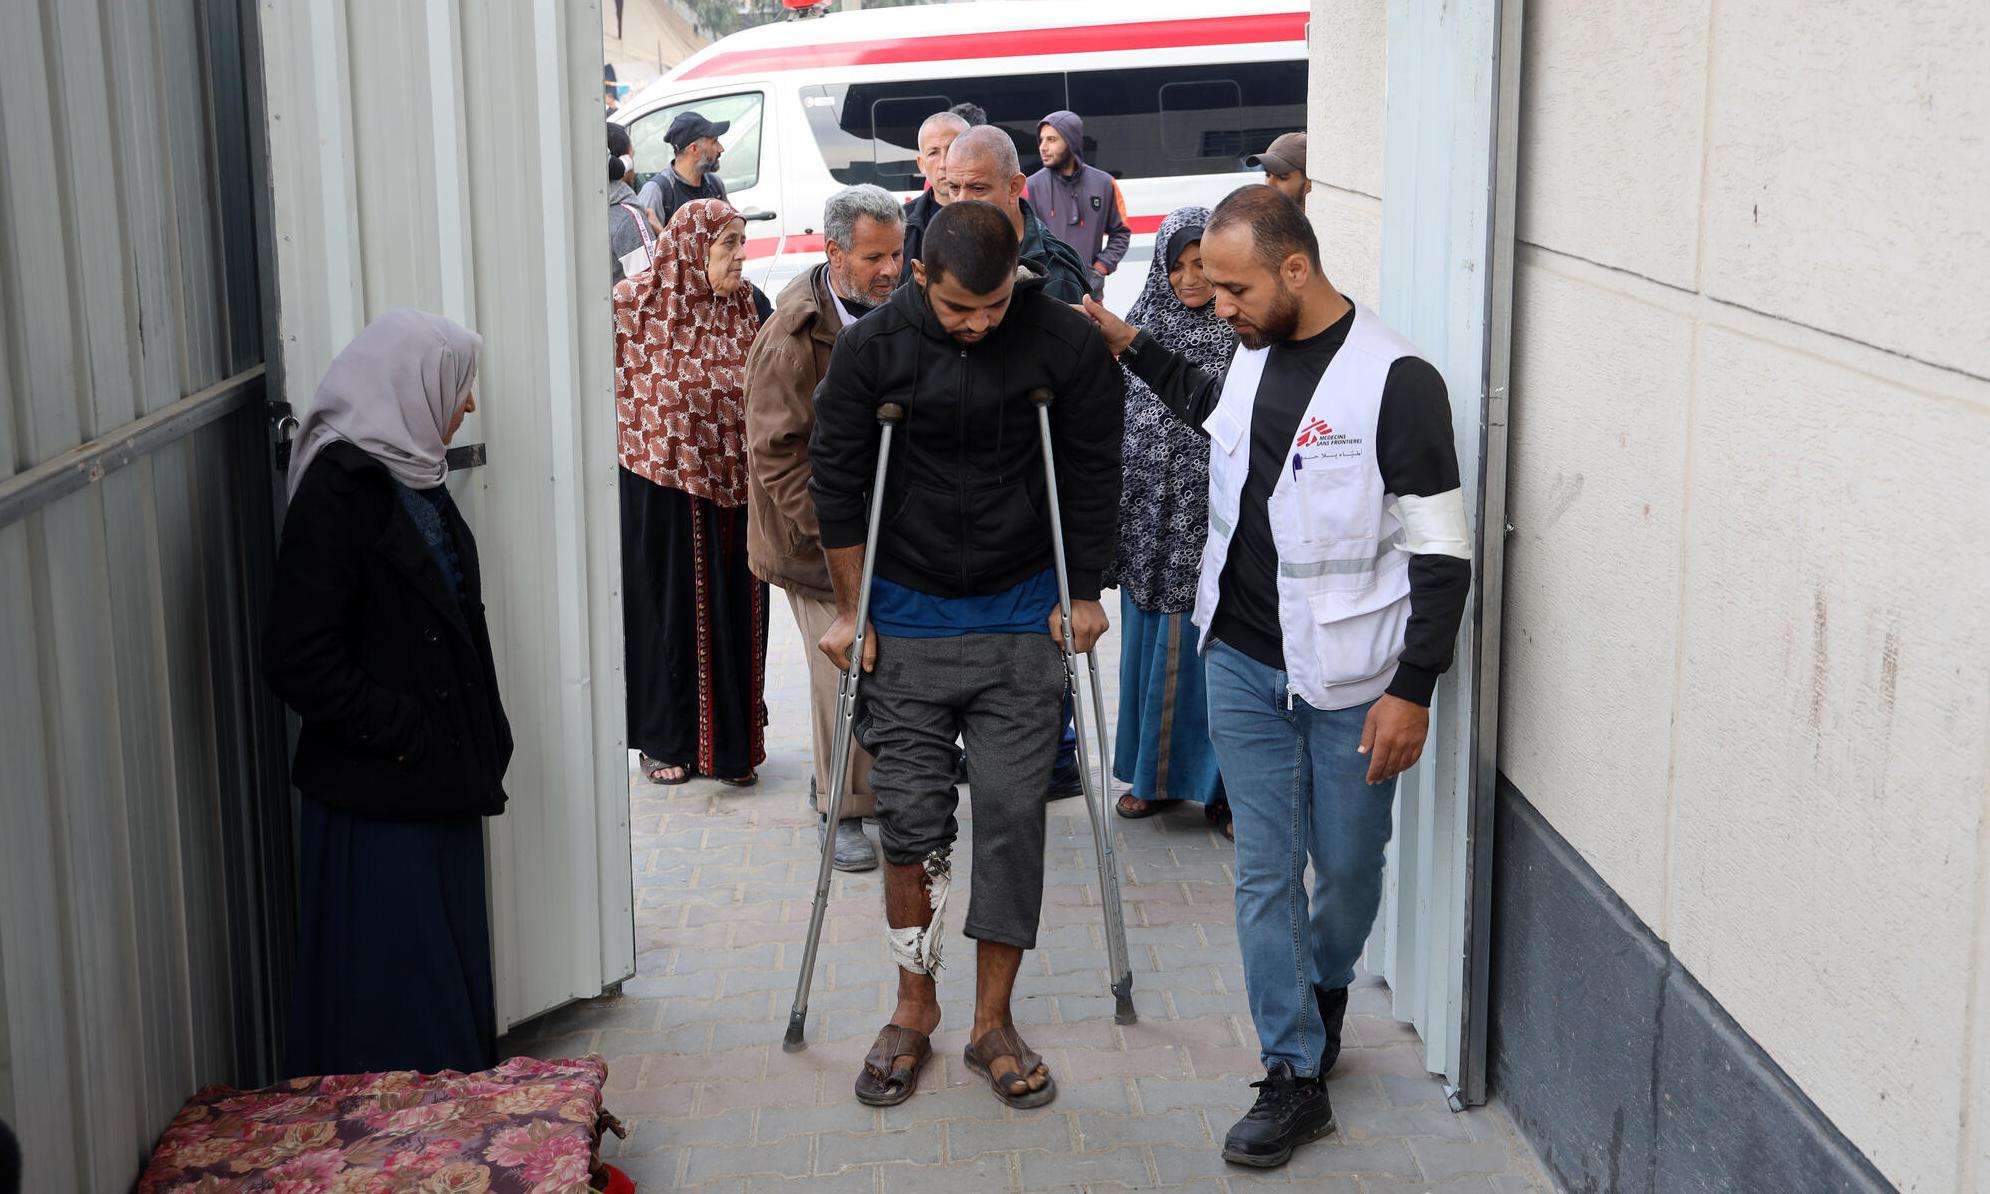 An MSF staff member helps an injured man on crutches at Rafah Indonesian Hospital in southern Gaza.